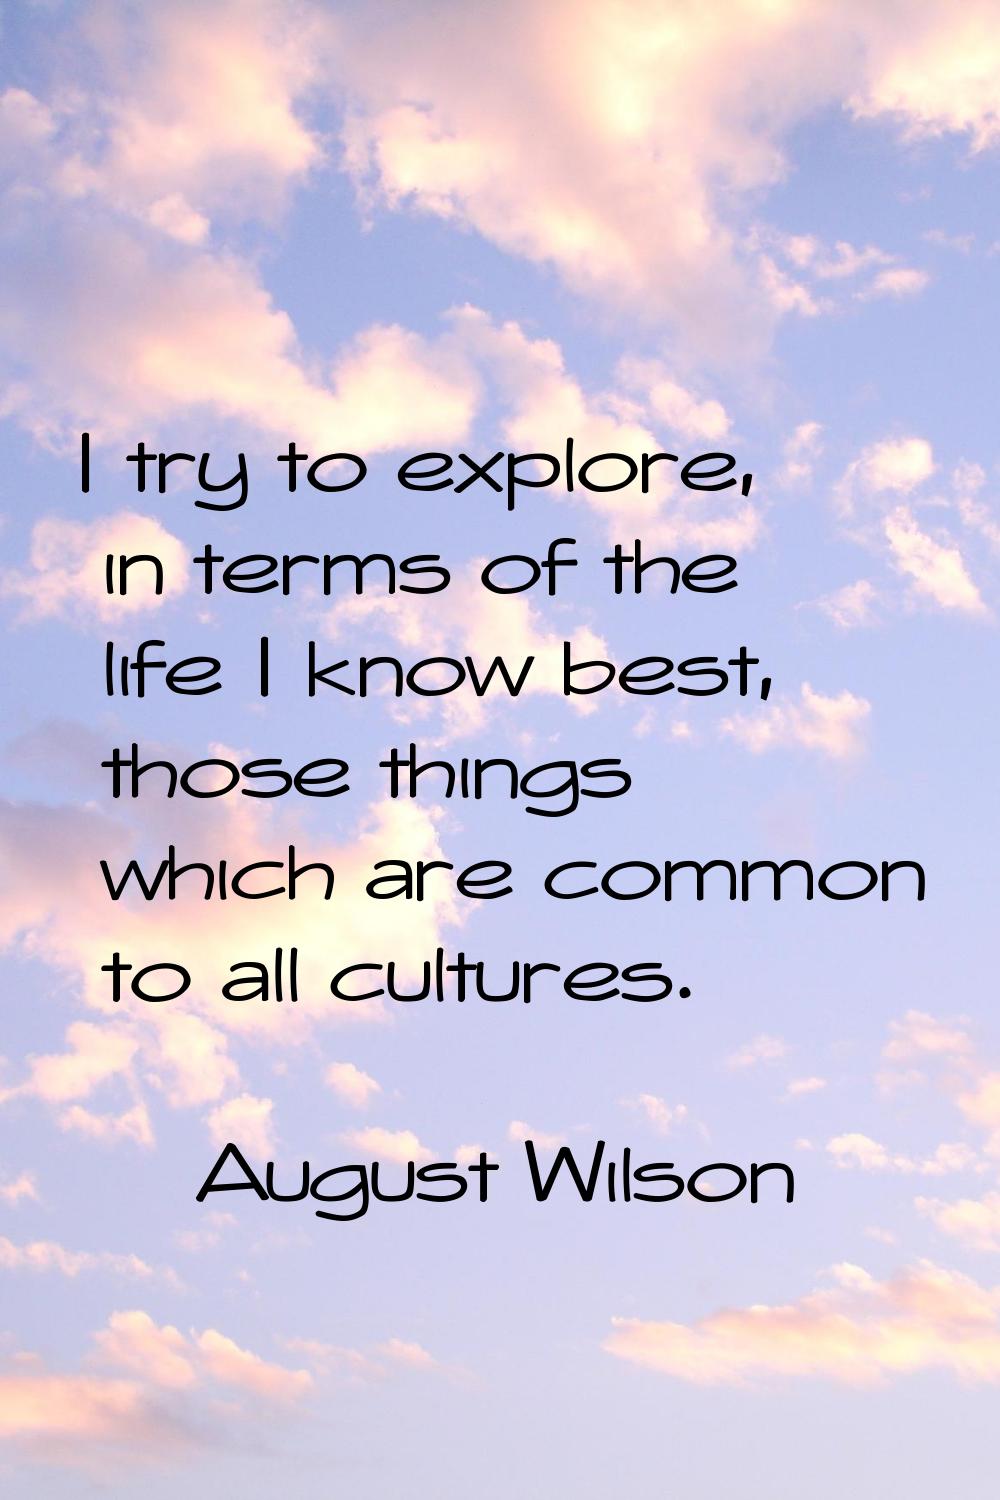 I try to explore, in terms of the life I know best, those things which are common to all cultures.